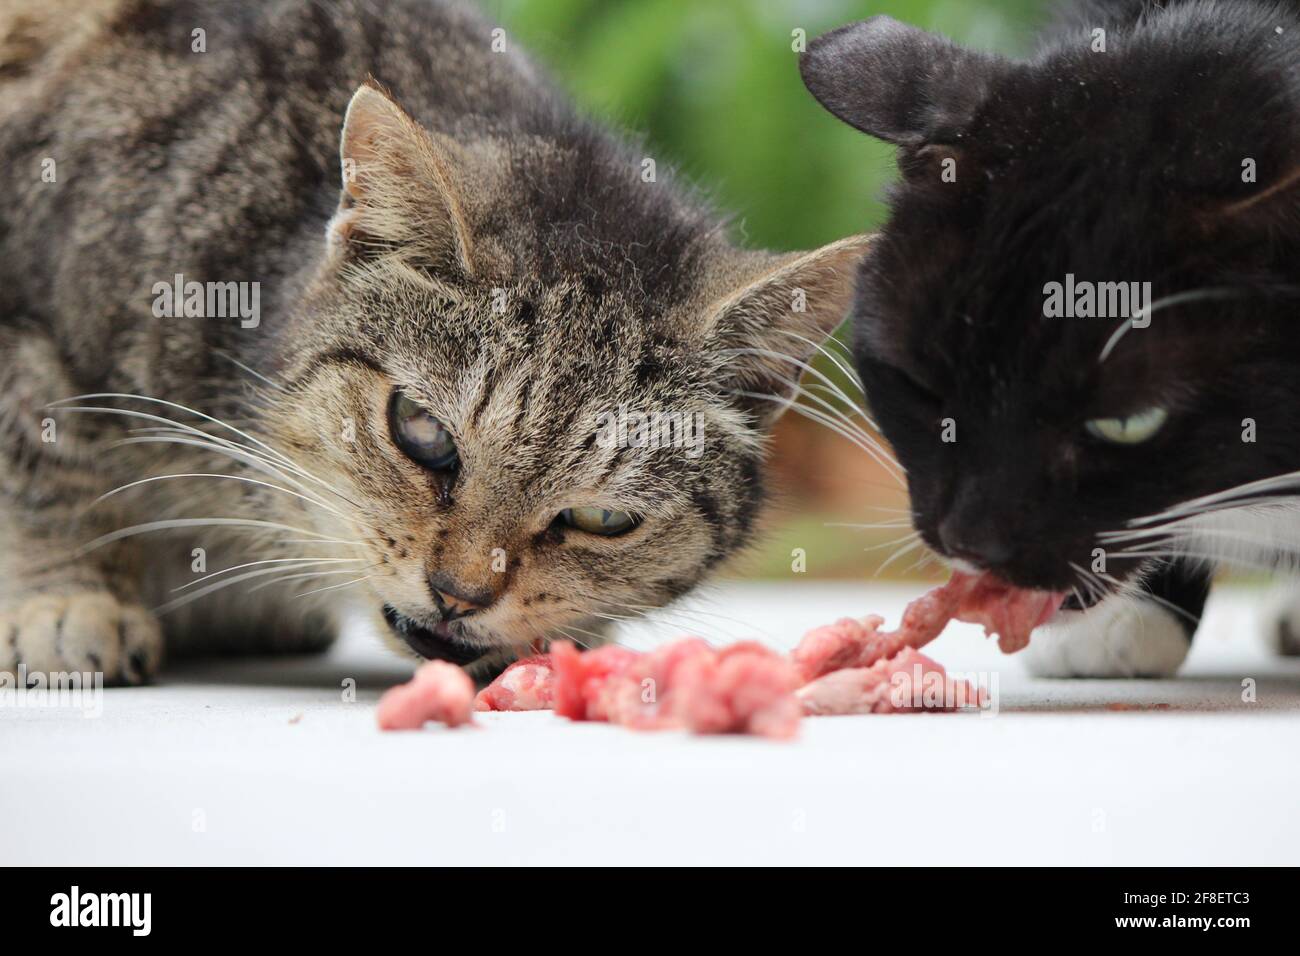 A grey tabby-colored pet cat and black street cats eat raw meat from the floor. Stock Photo